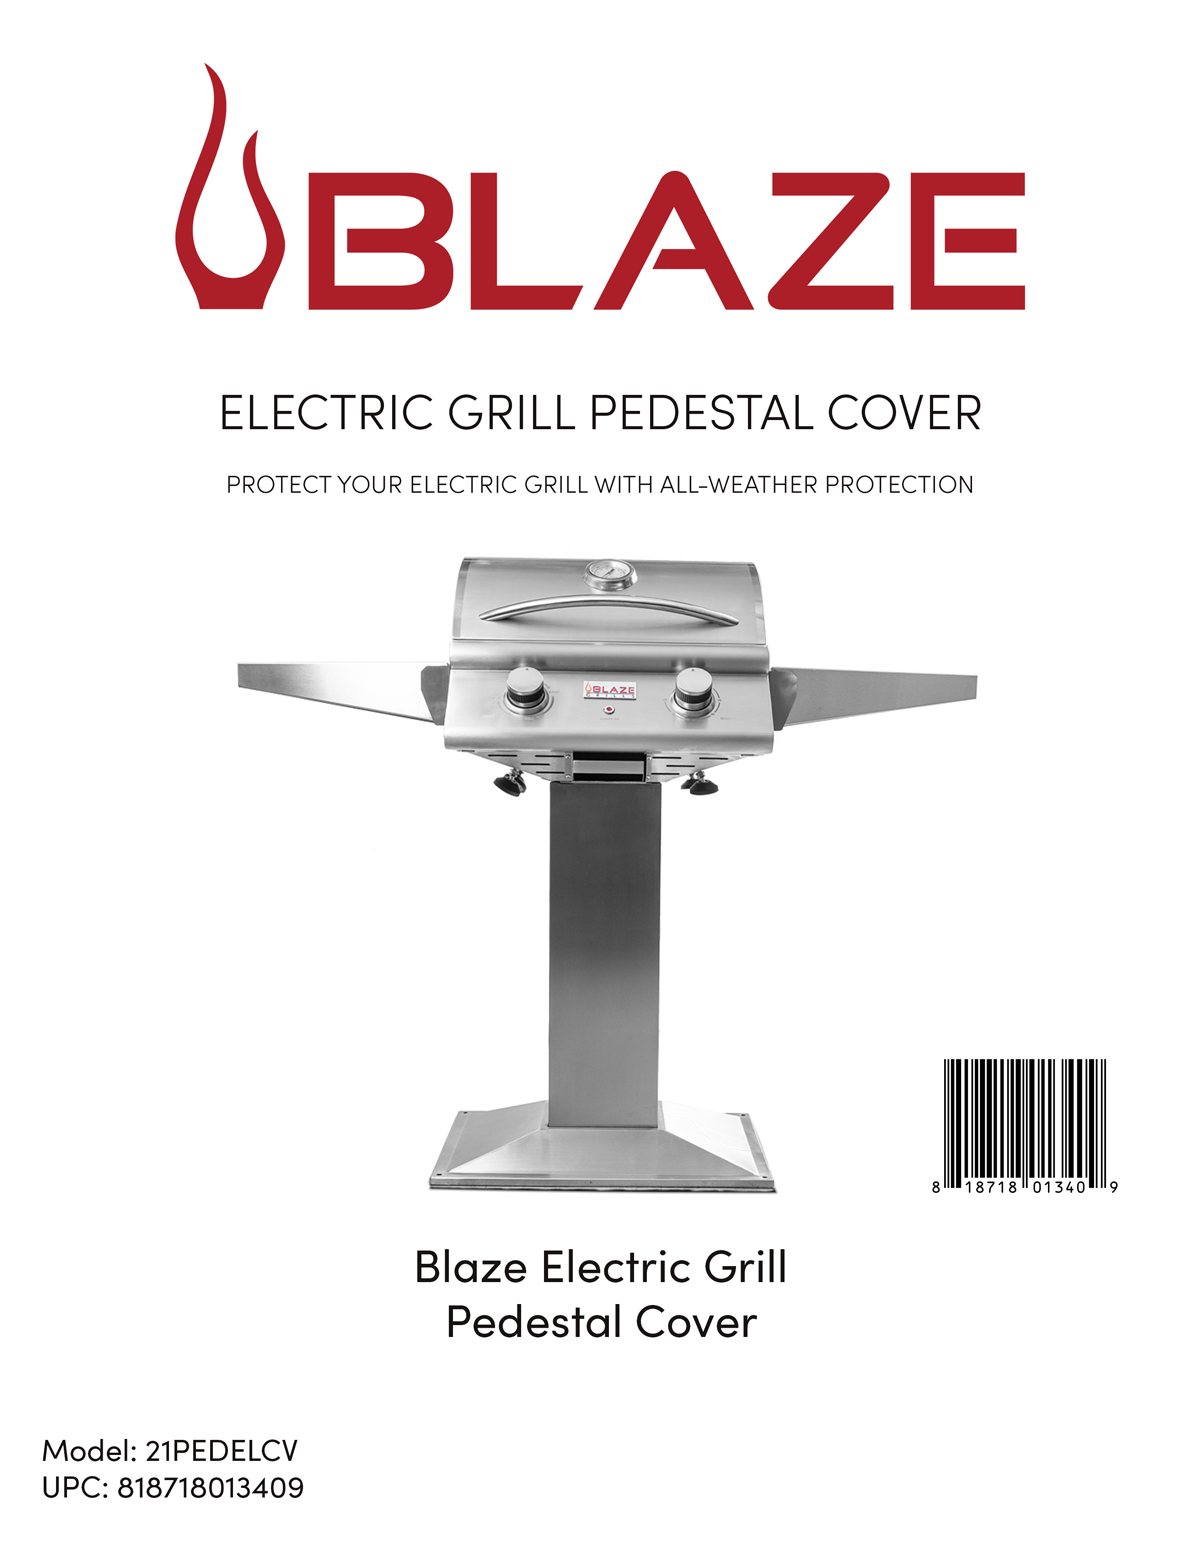 Electric Grill Pedestal Cover